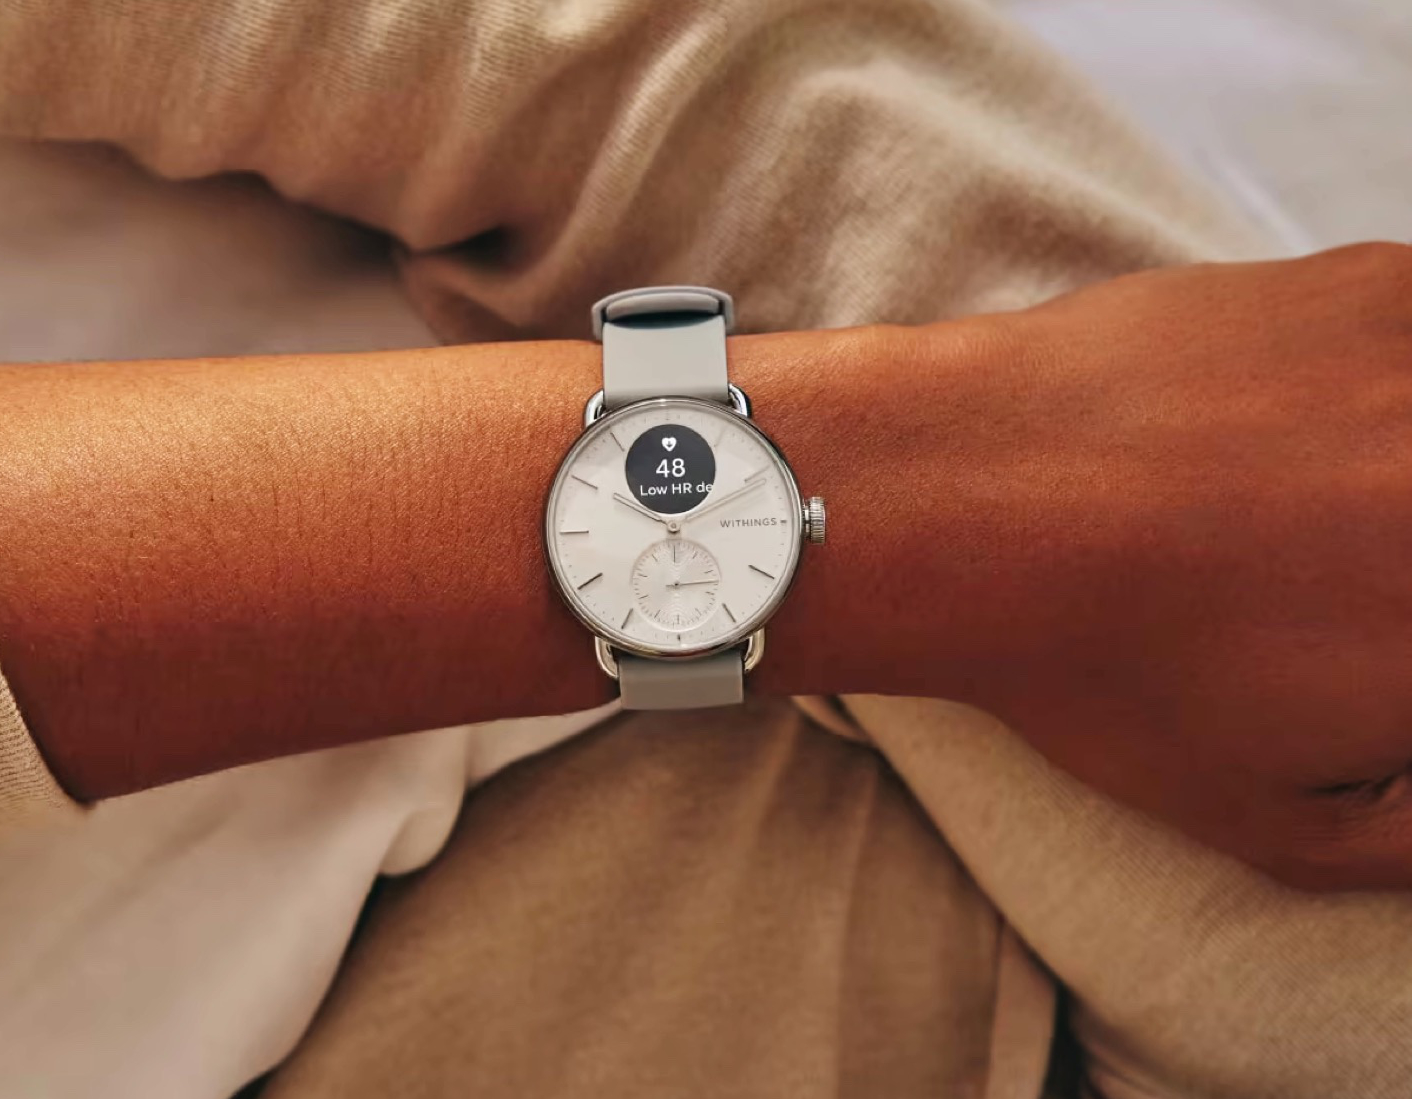 Withings ScanWatch checks for Afib and sleep apnea | Best Buy Blog